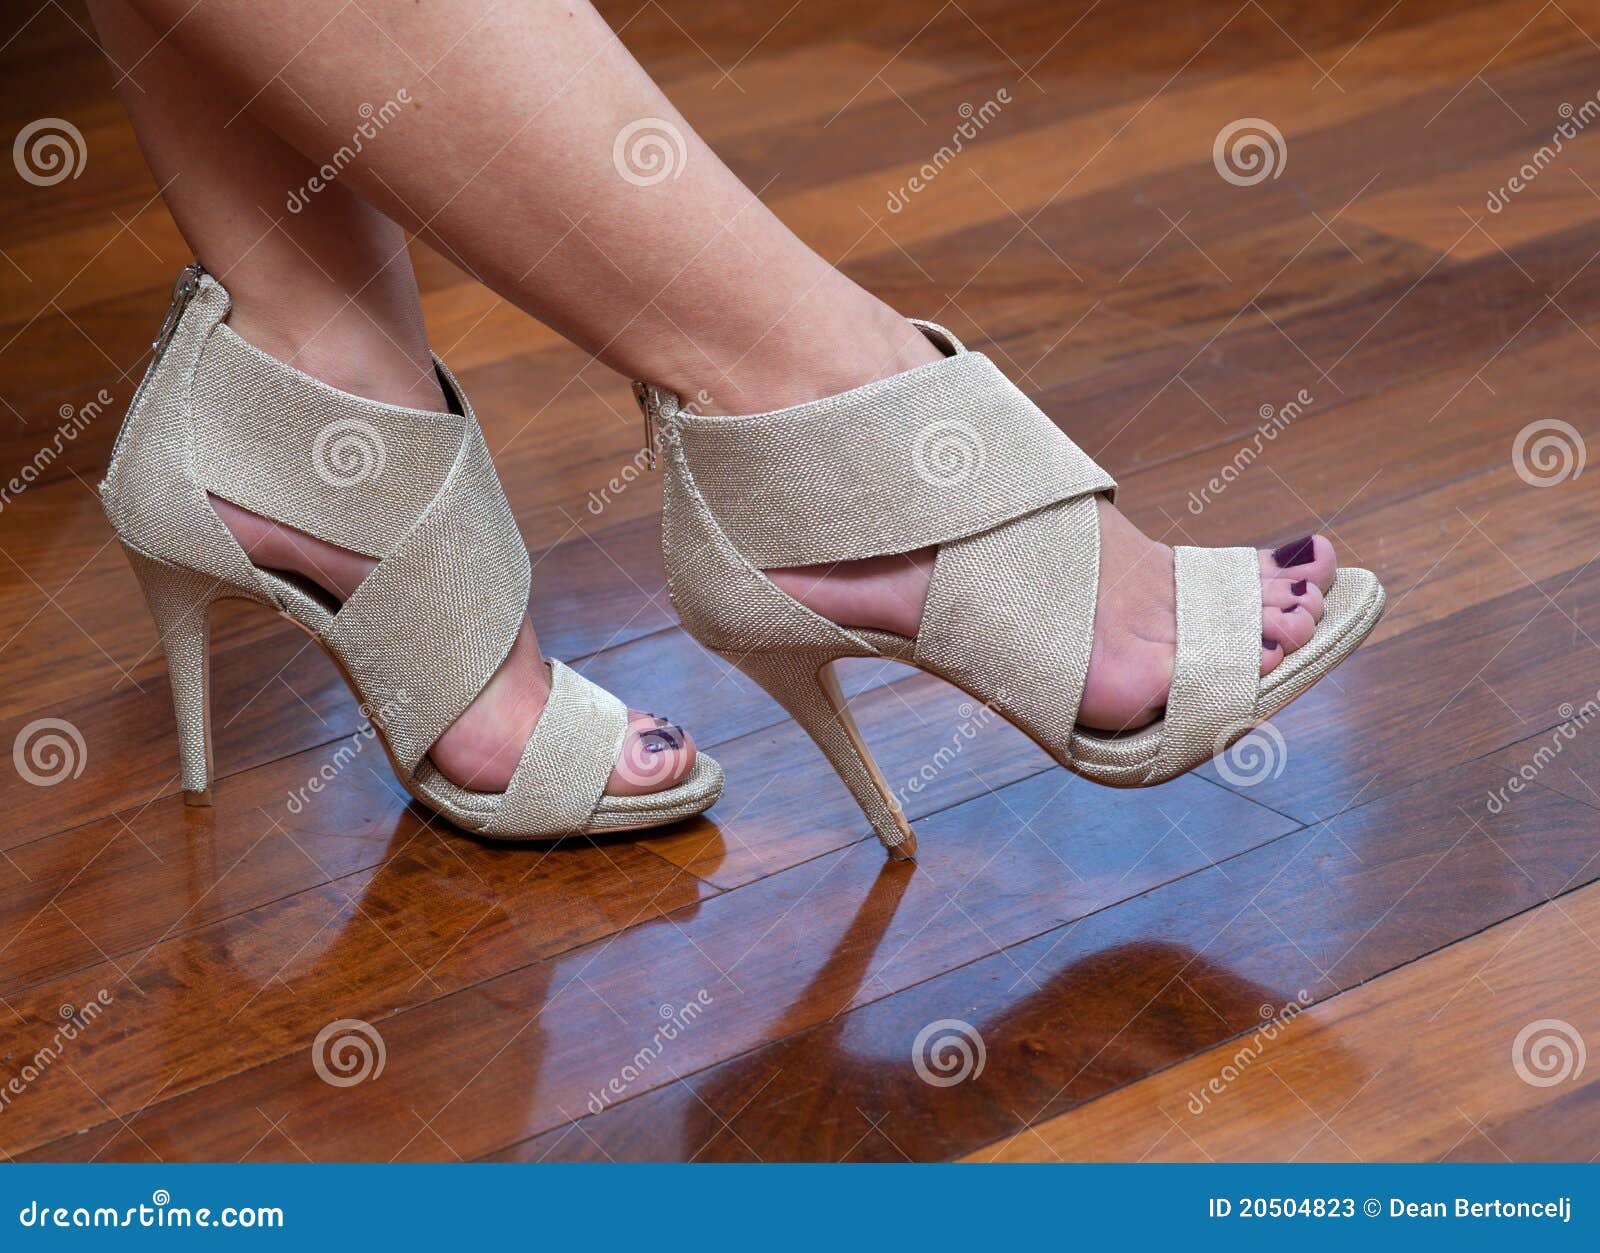 woman feet in shoes